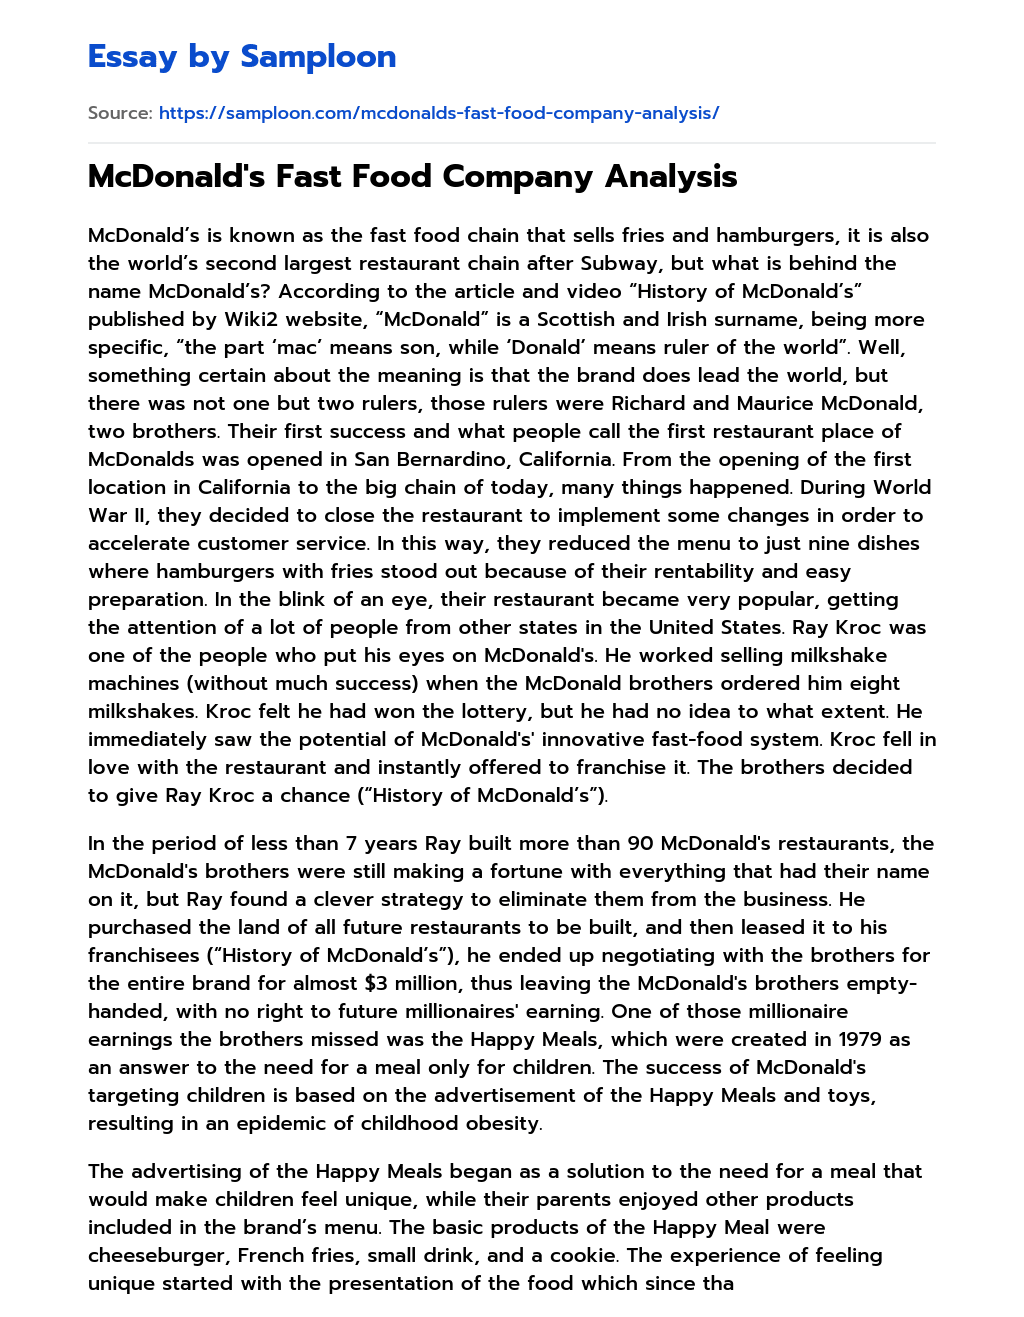 research paper on mcdonald's food